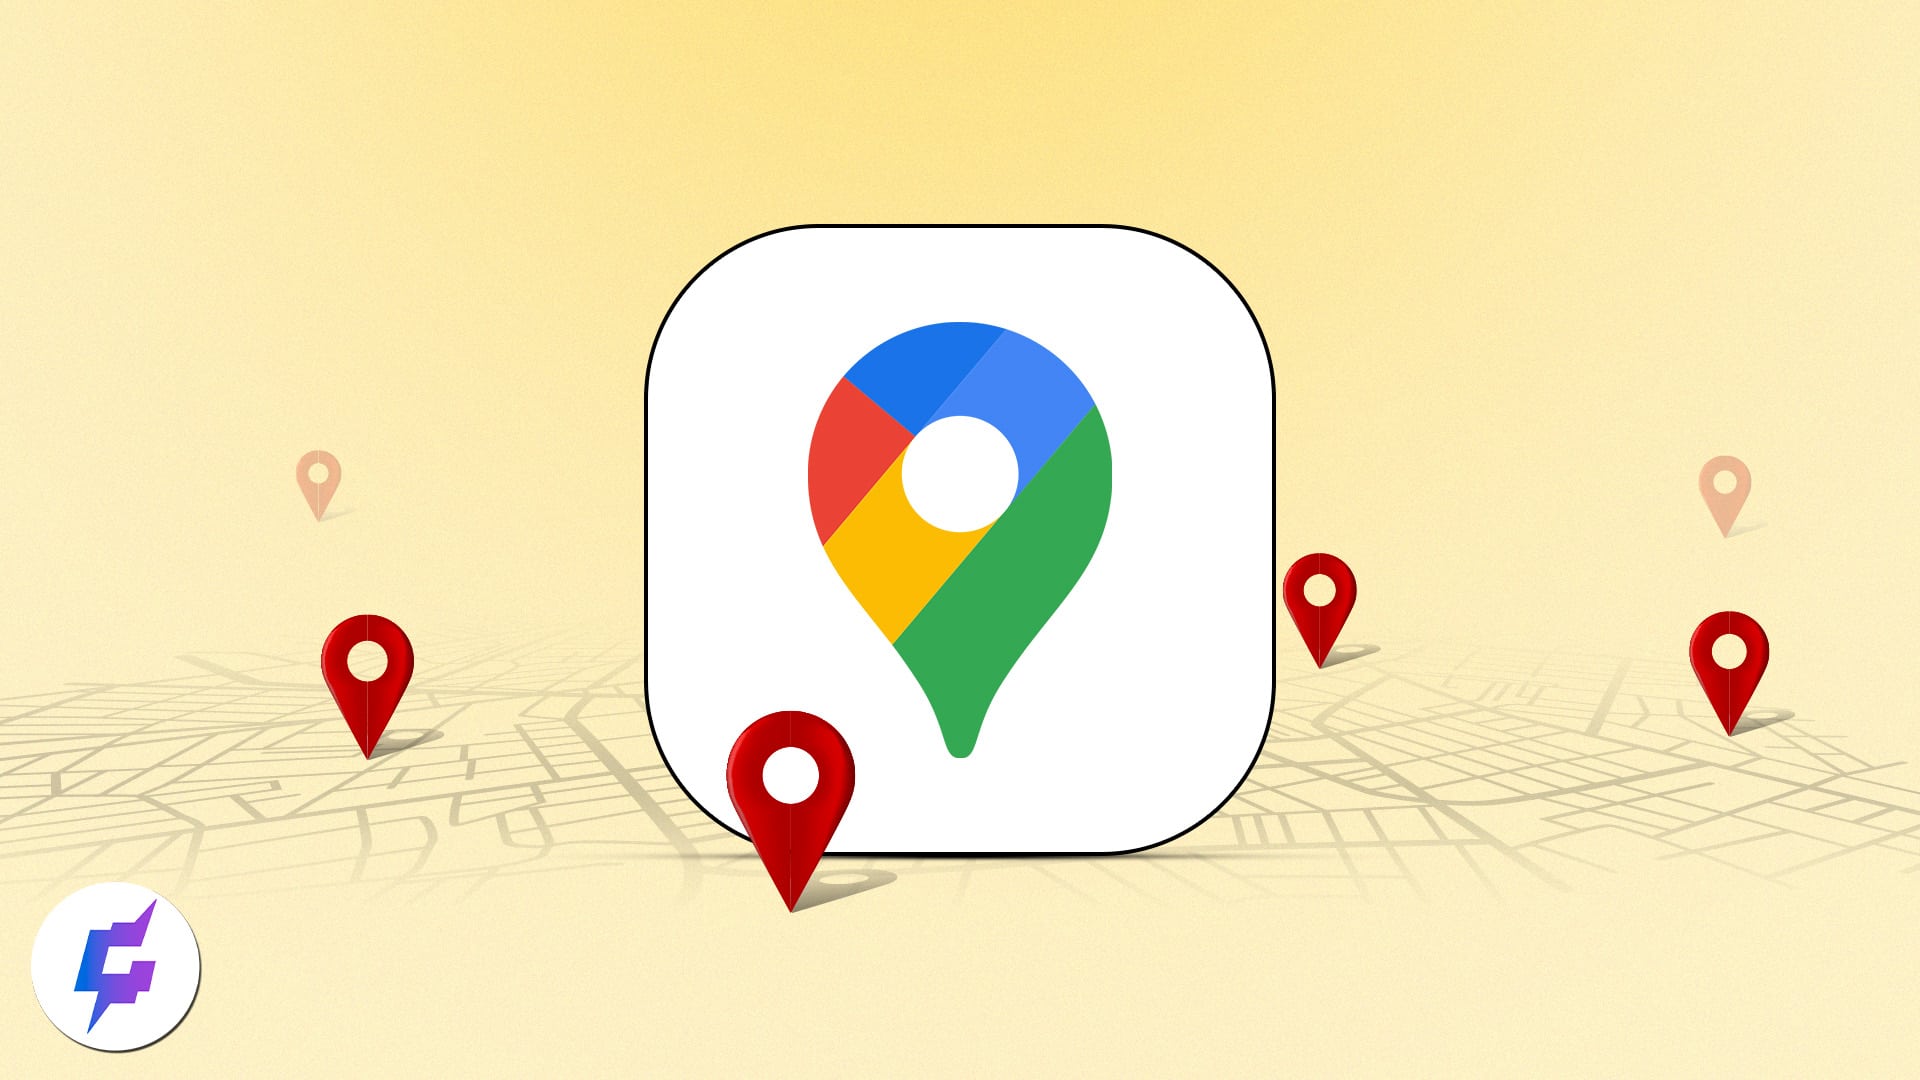 How to drop a pin in Google Maps on Android